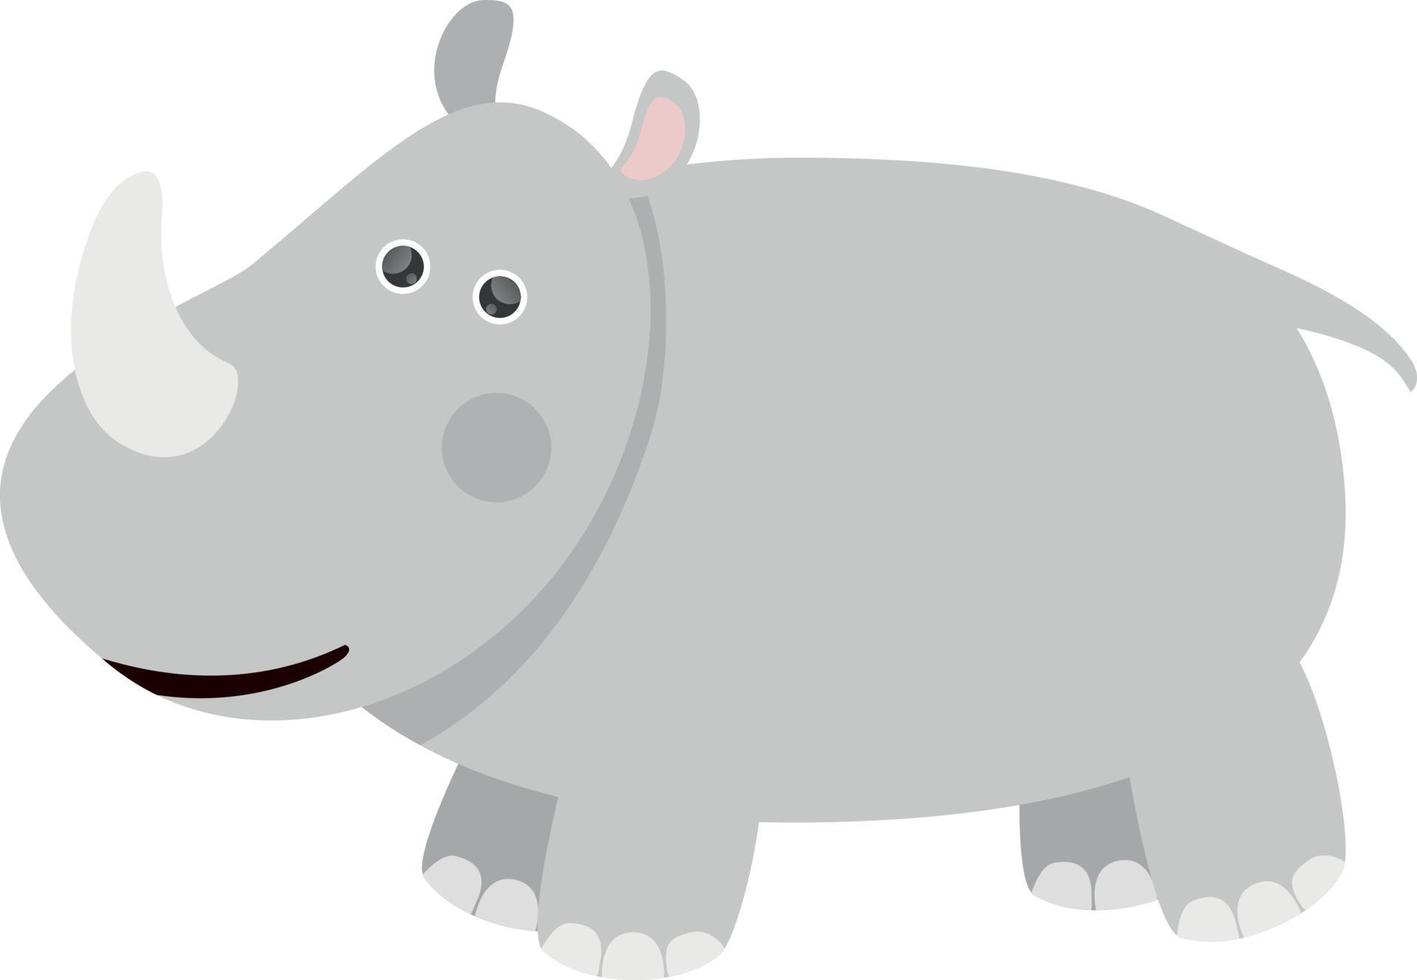 Cute Rhino Kids Illustration Drawing for Books Magazines Learning Cards Africa Animals vector